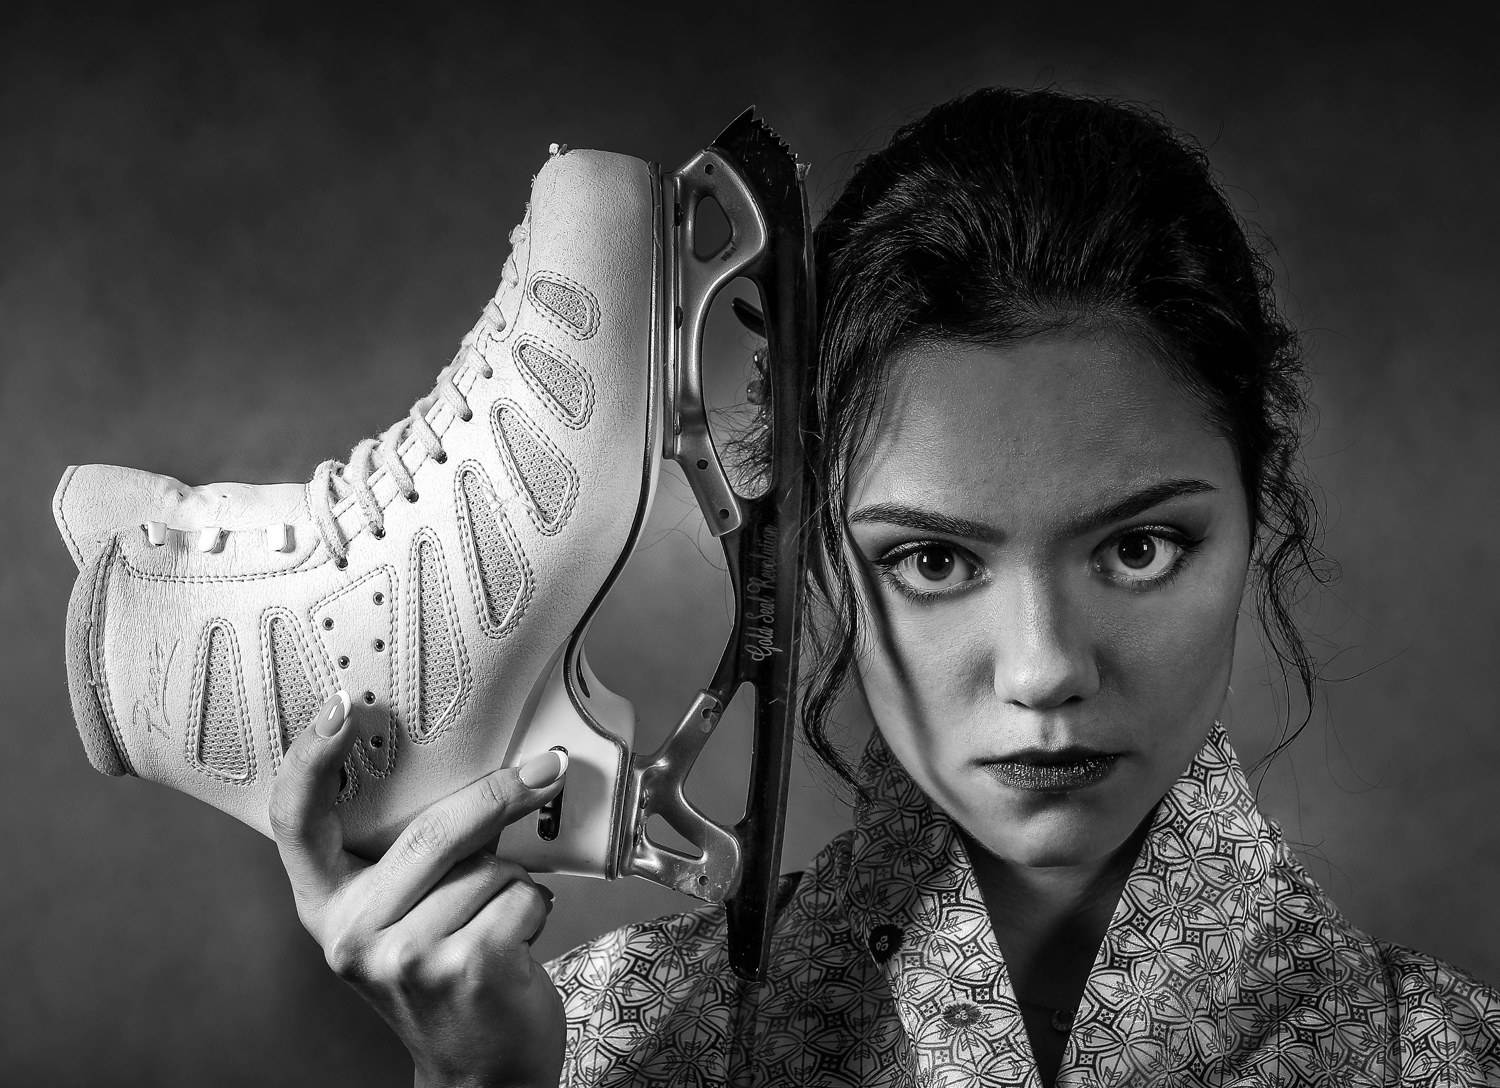 Two-time world champion and winner of two silver medals at the Olympic Games in Pyeongchan- skater Evgenia Medvedeva